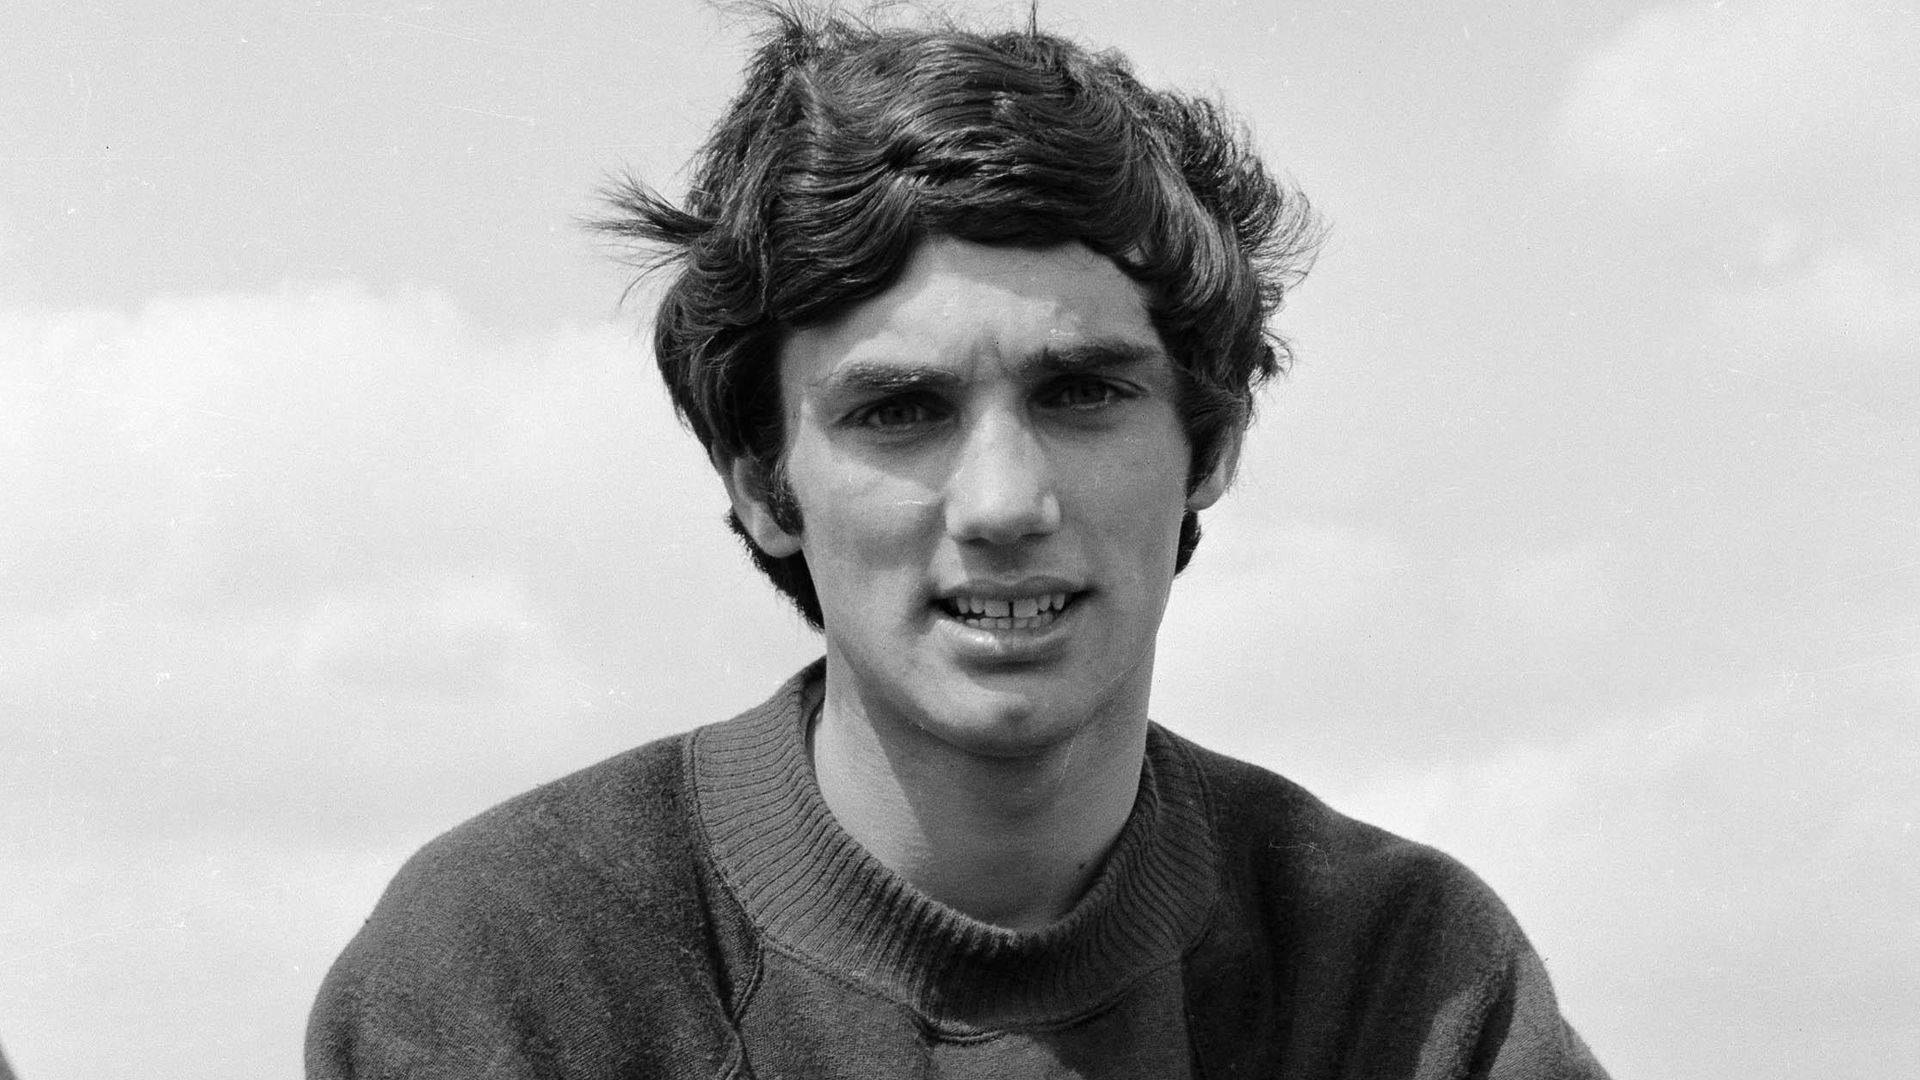  Belated Happy Birthday to George Best who would have been 75 yesterday 